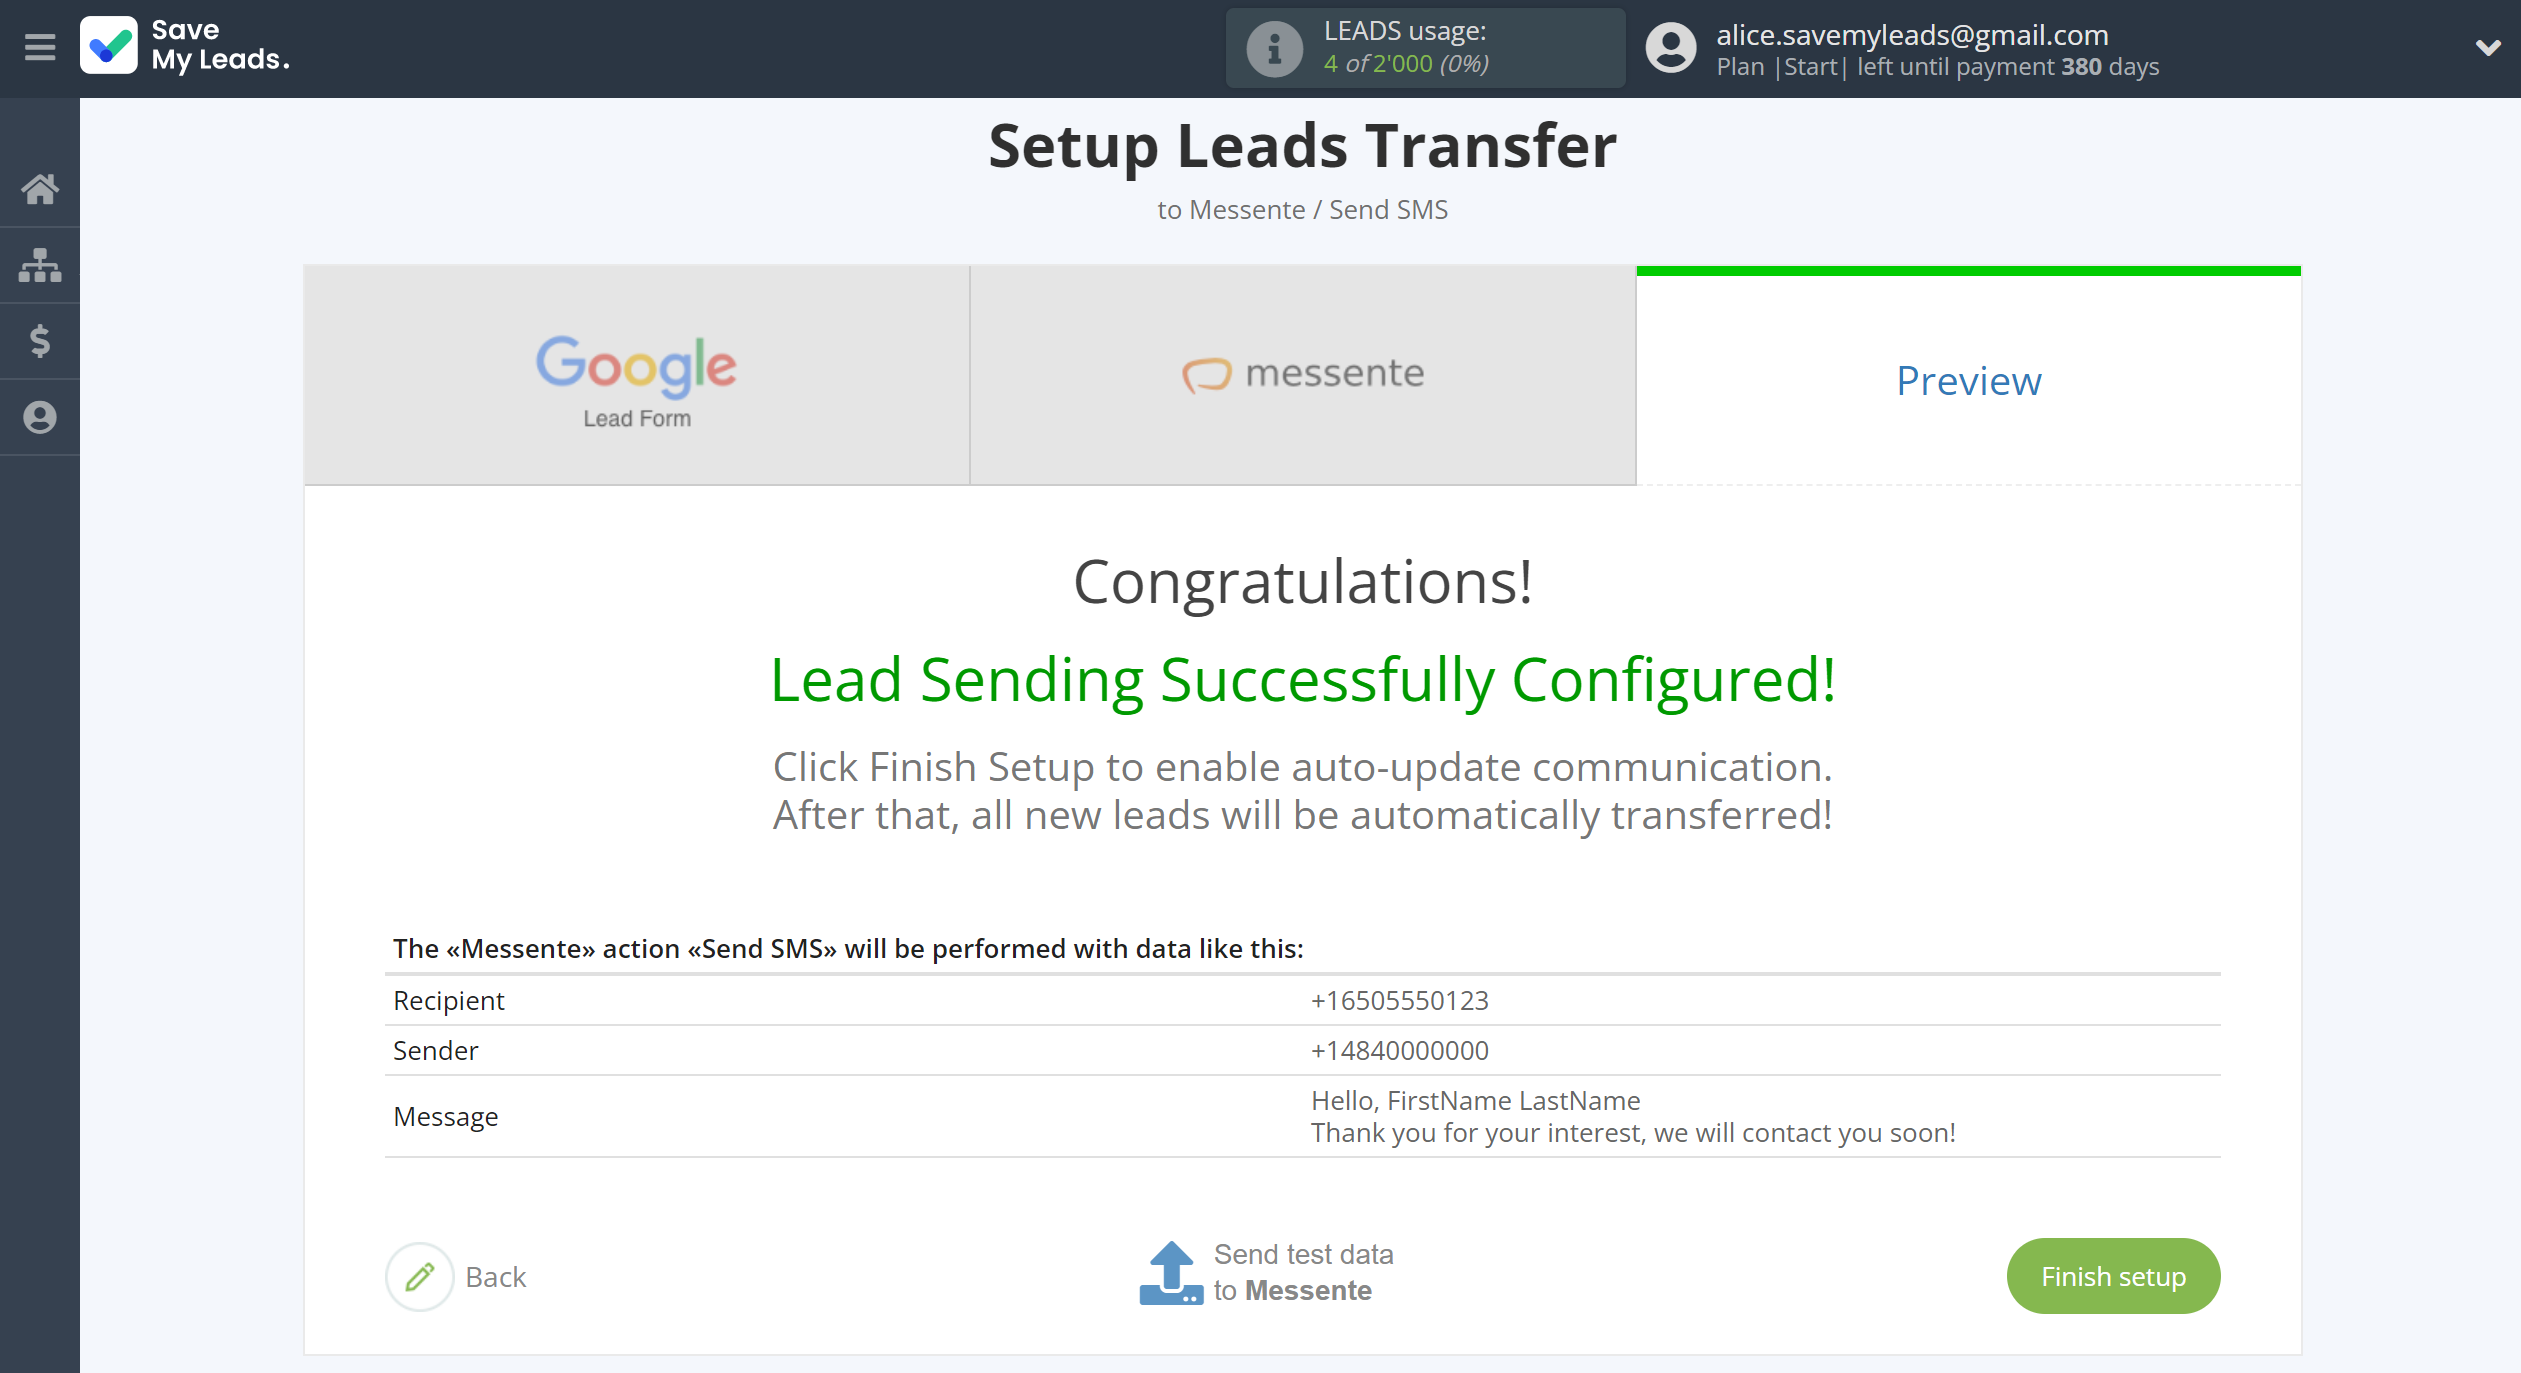 How to Connect Google Lead Form with Messente | Test data